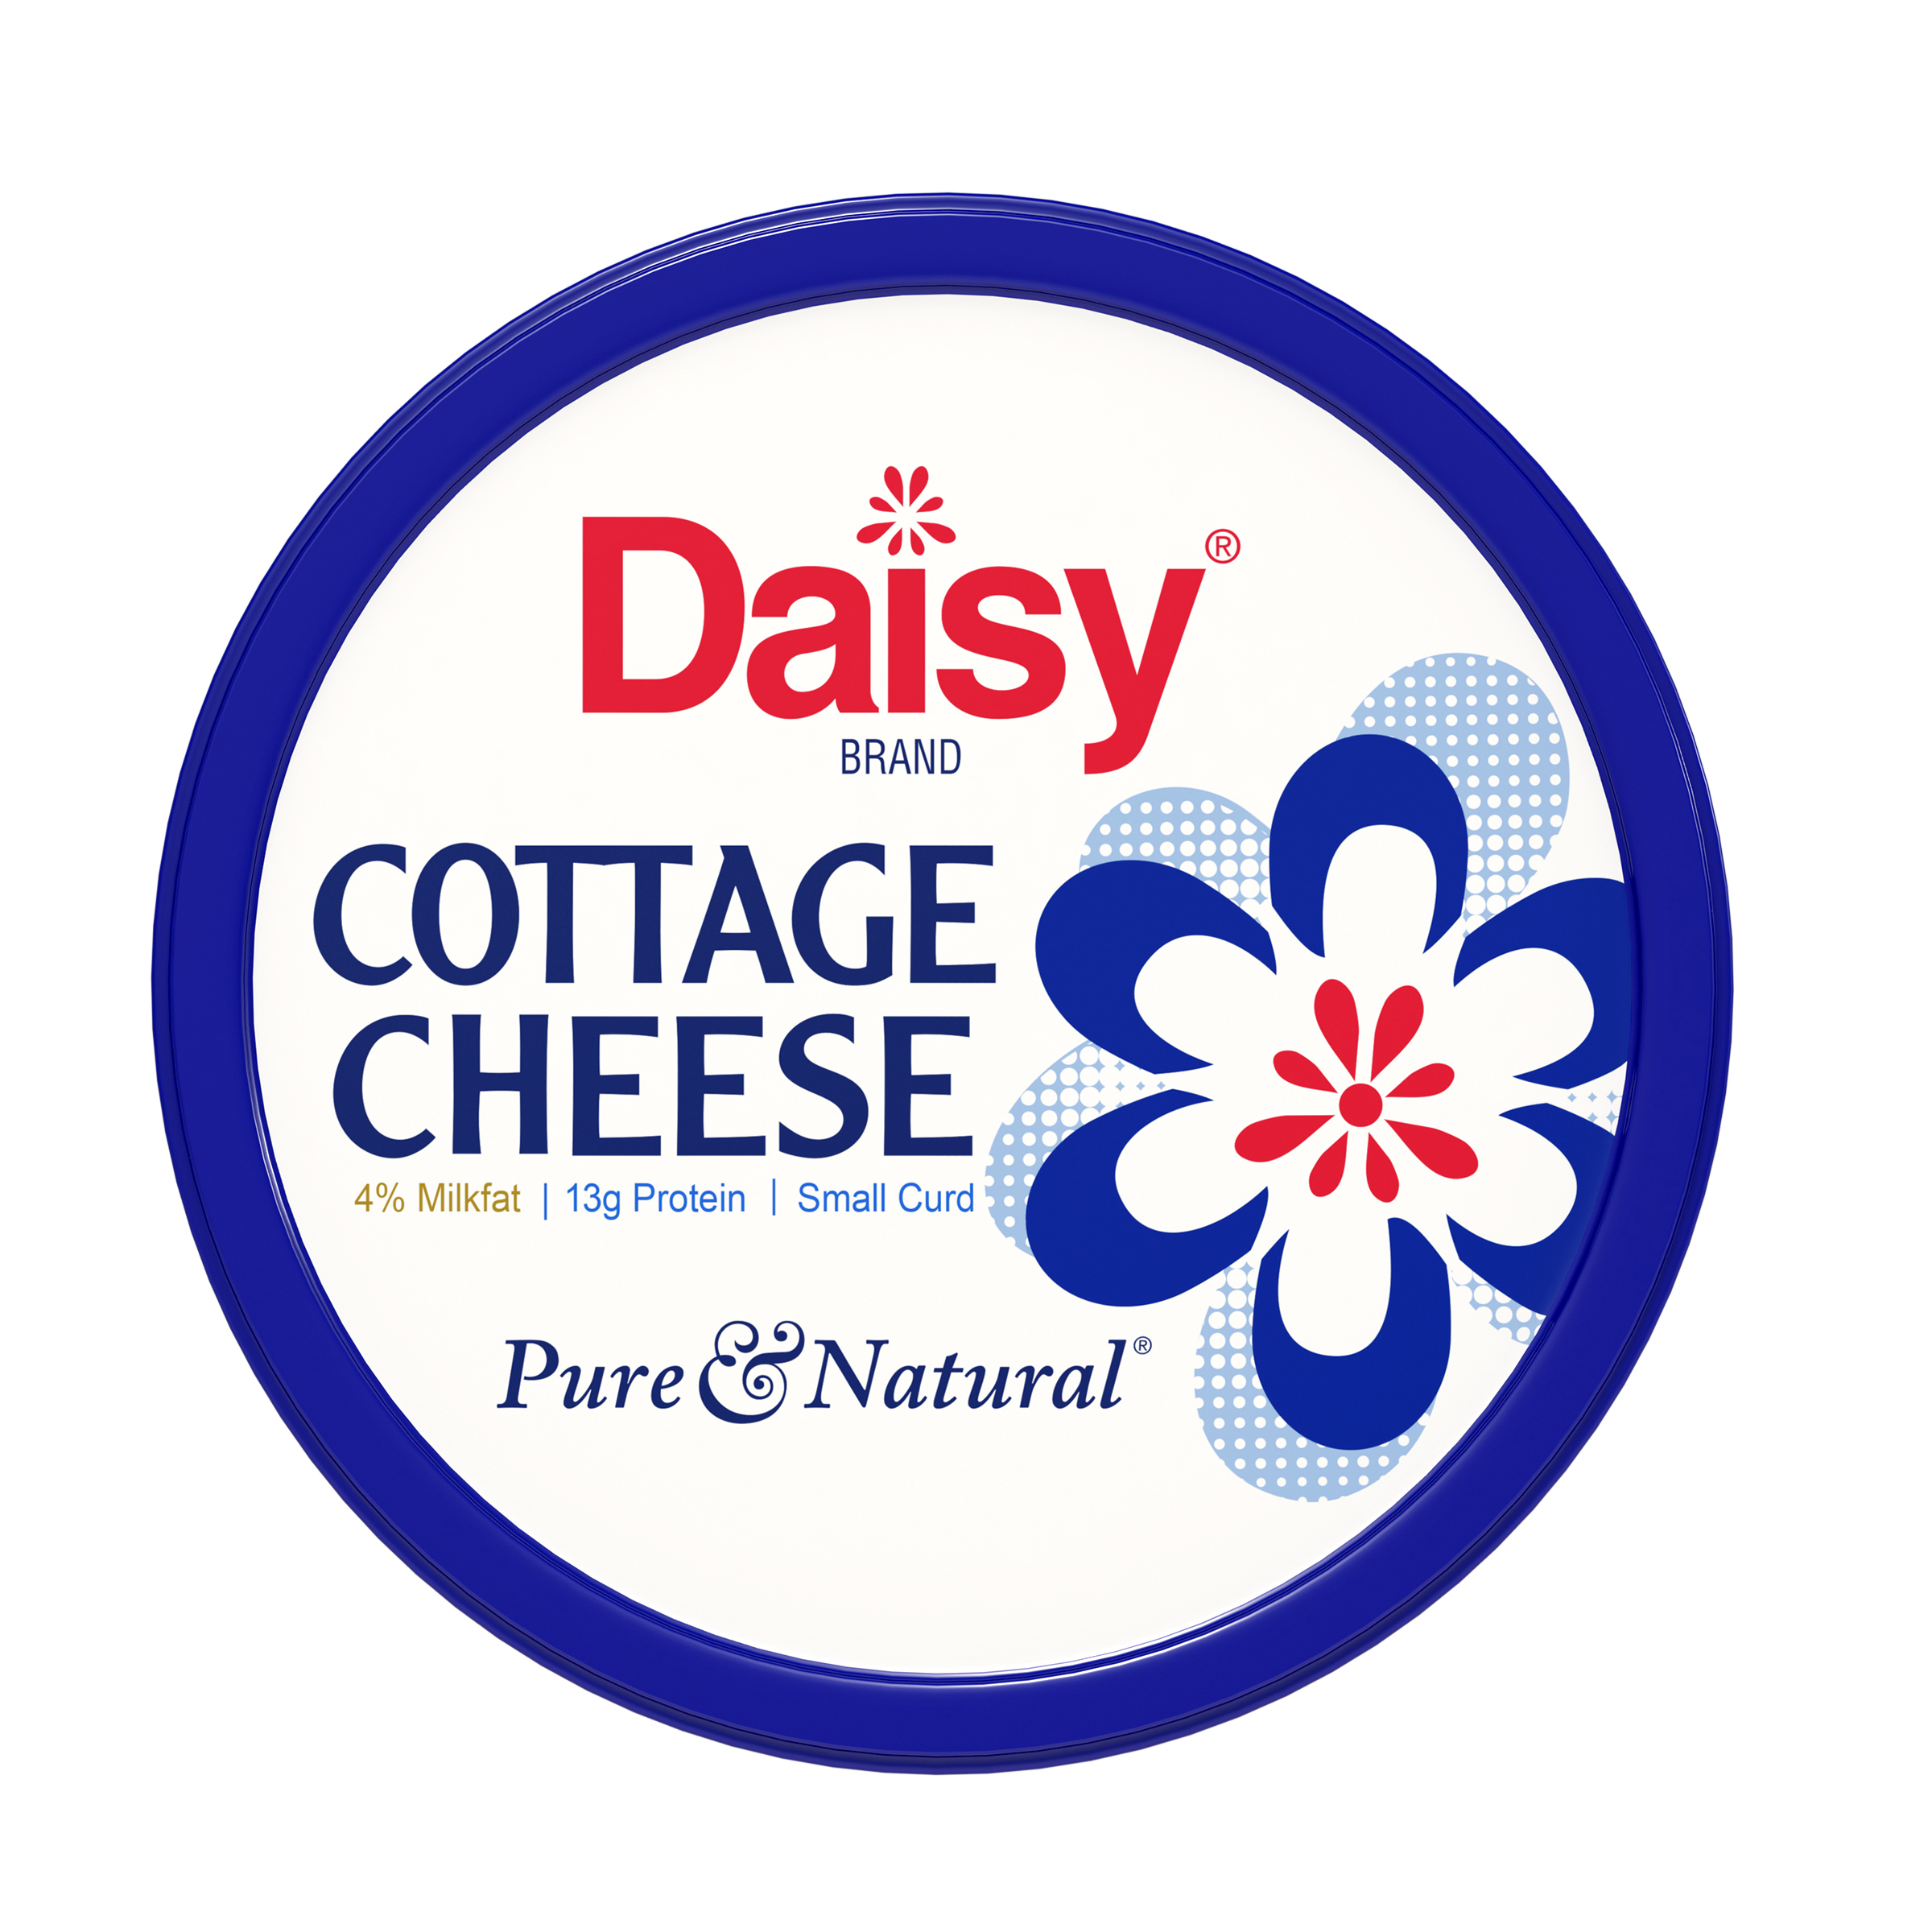 Daisy Pure and Natural Cottage Cheese, 4% Milkfat, 24 oz (1.5 lb) Tub (Refrigerated) - 13g of Protein per serving - image 4 of 10